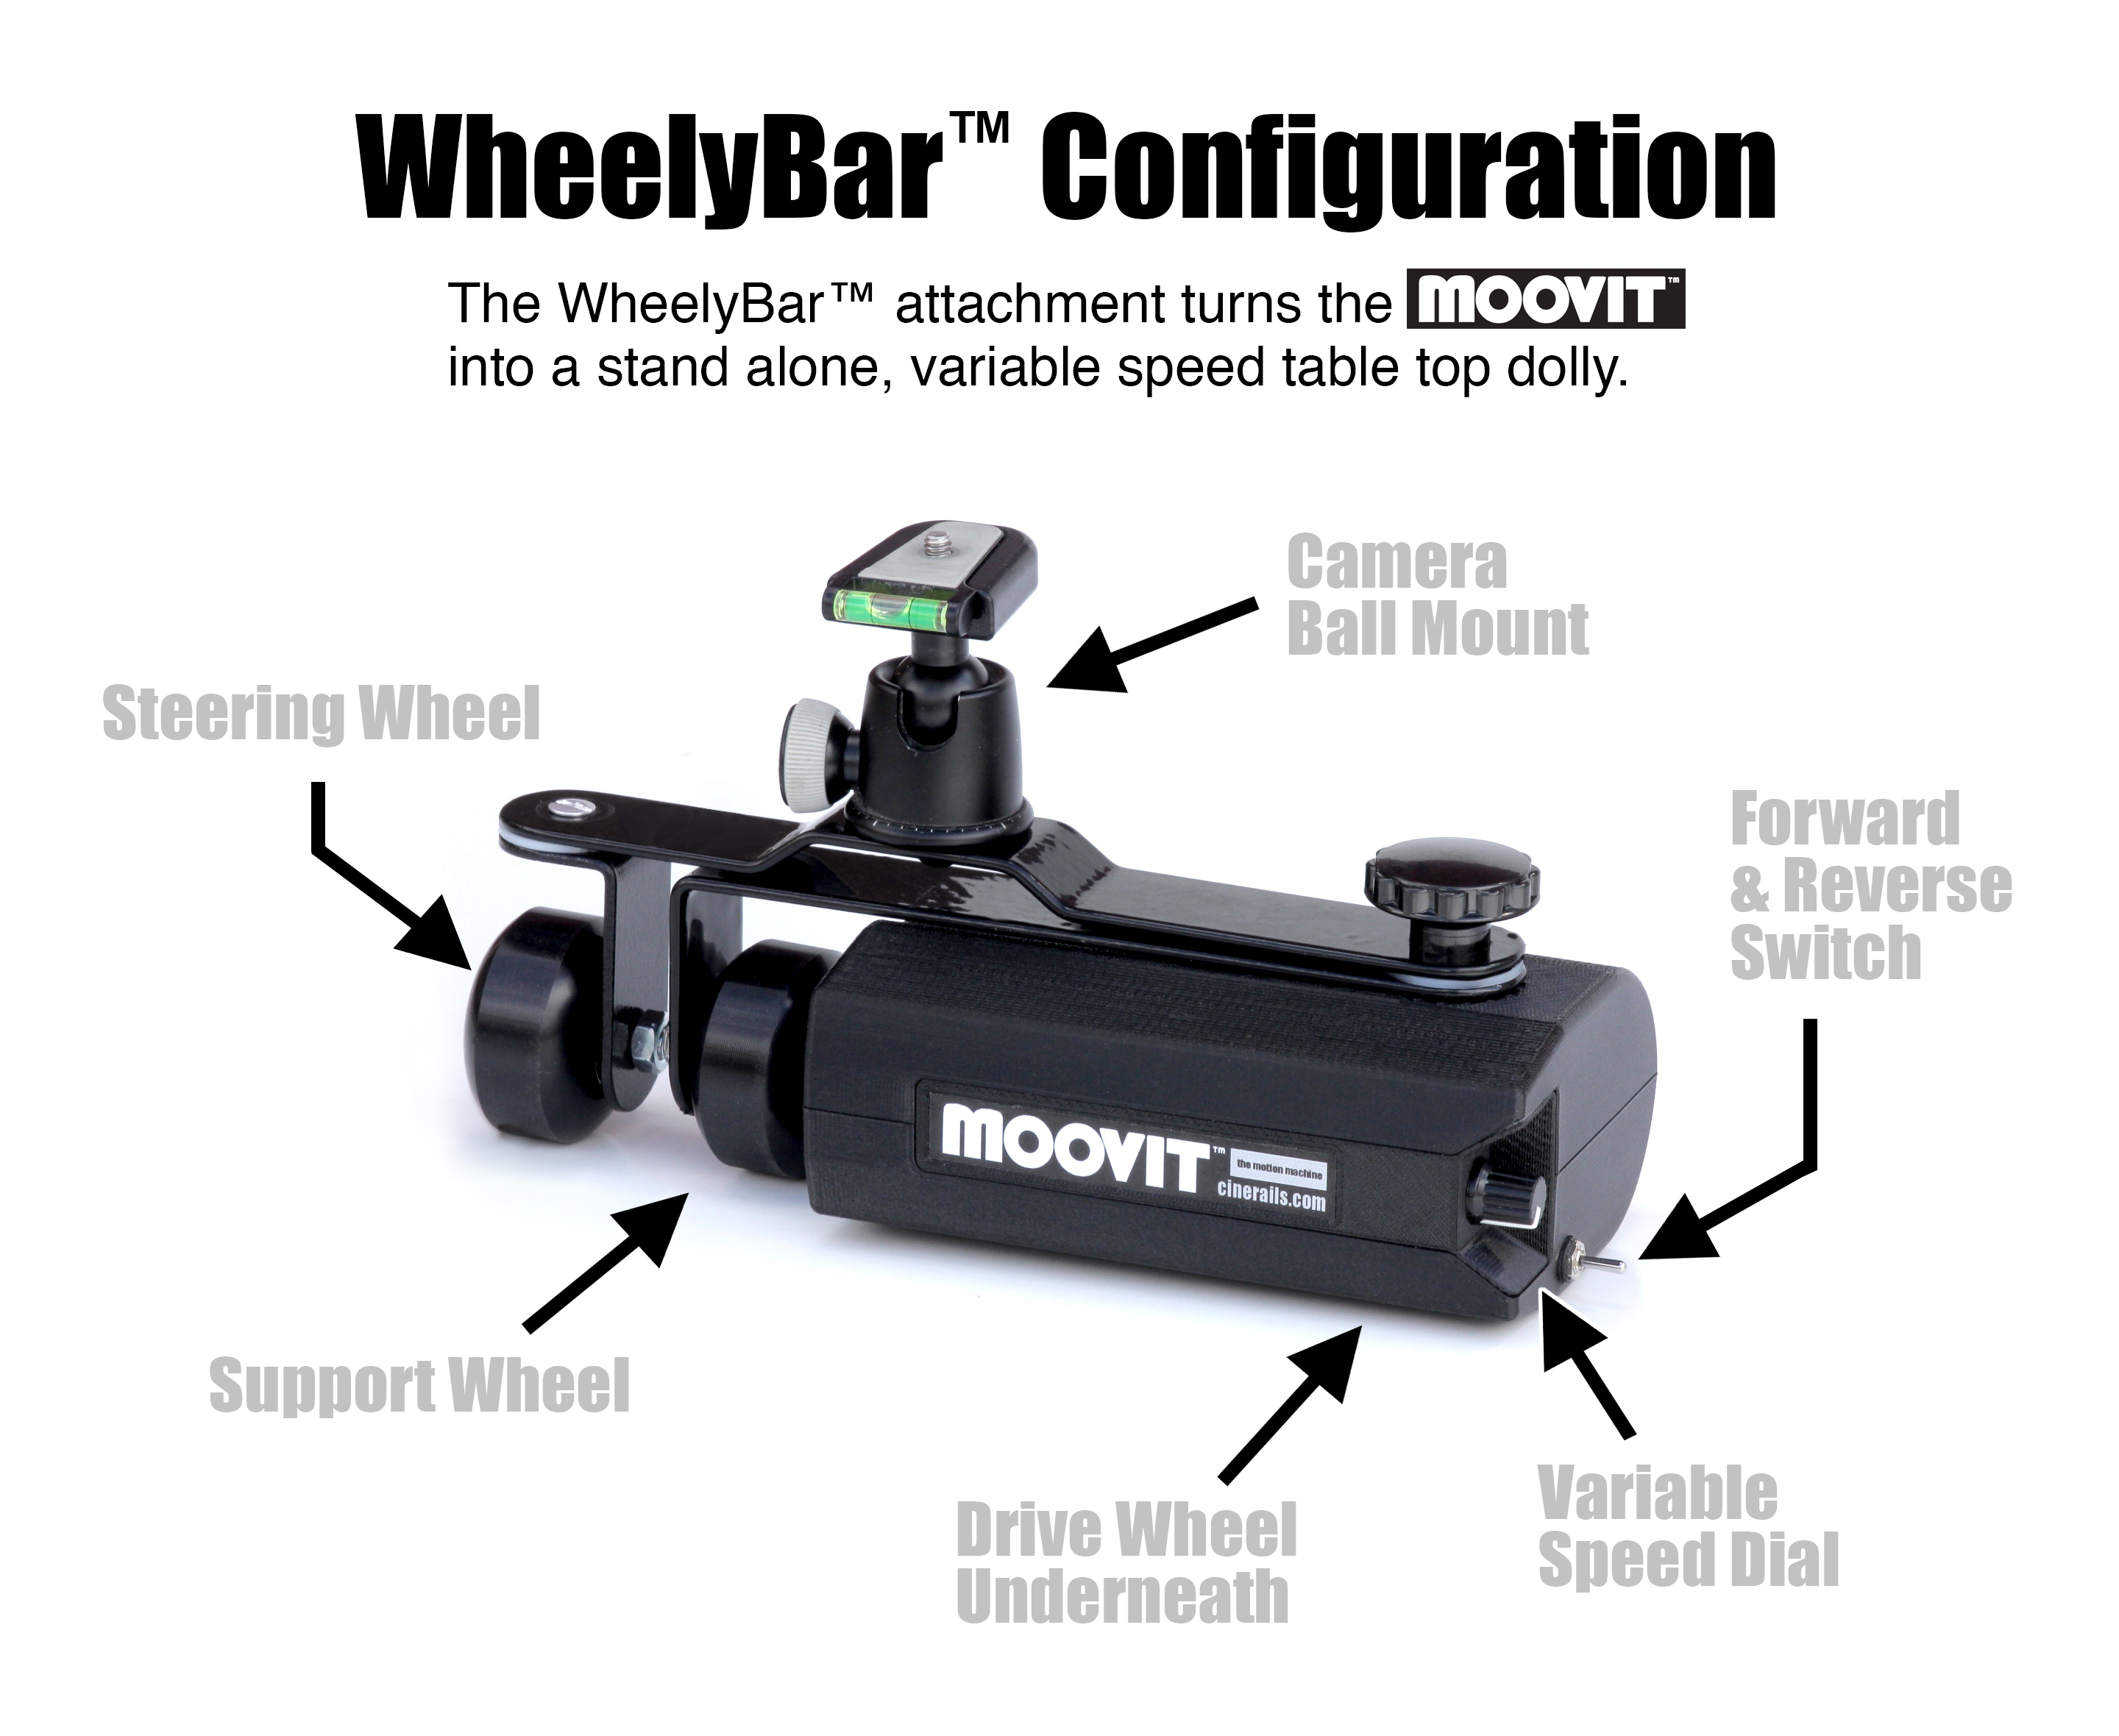 MOOVIT™ Motion Drive Unit Attached to the WheelyBar™ Accessory and Folds Out to Create a Self Contained Table Top Dolly with Variable Speed and Bluetooth™ Control